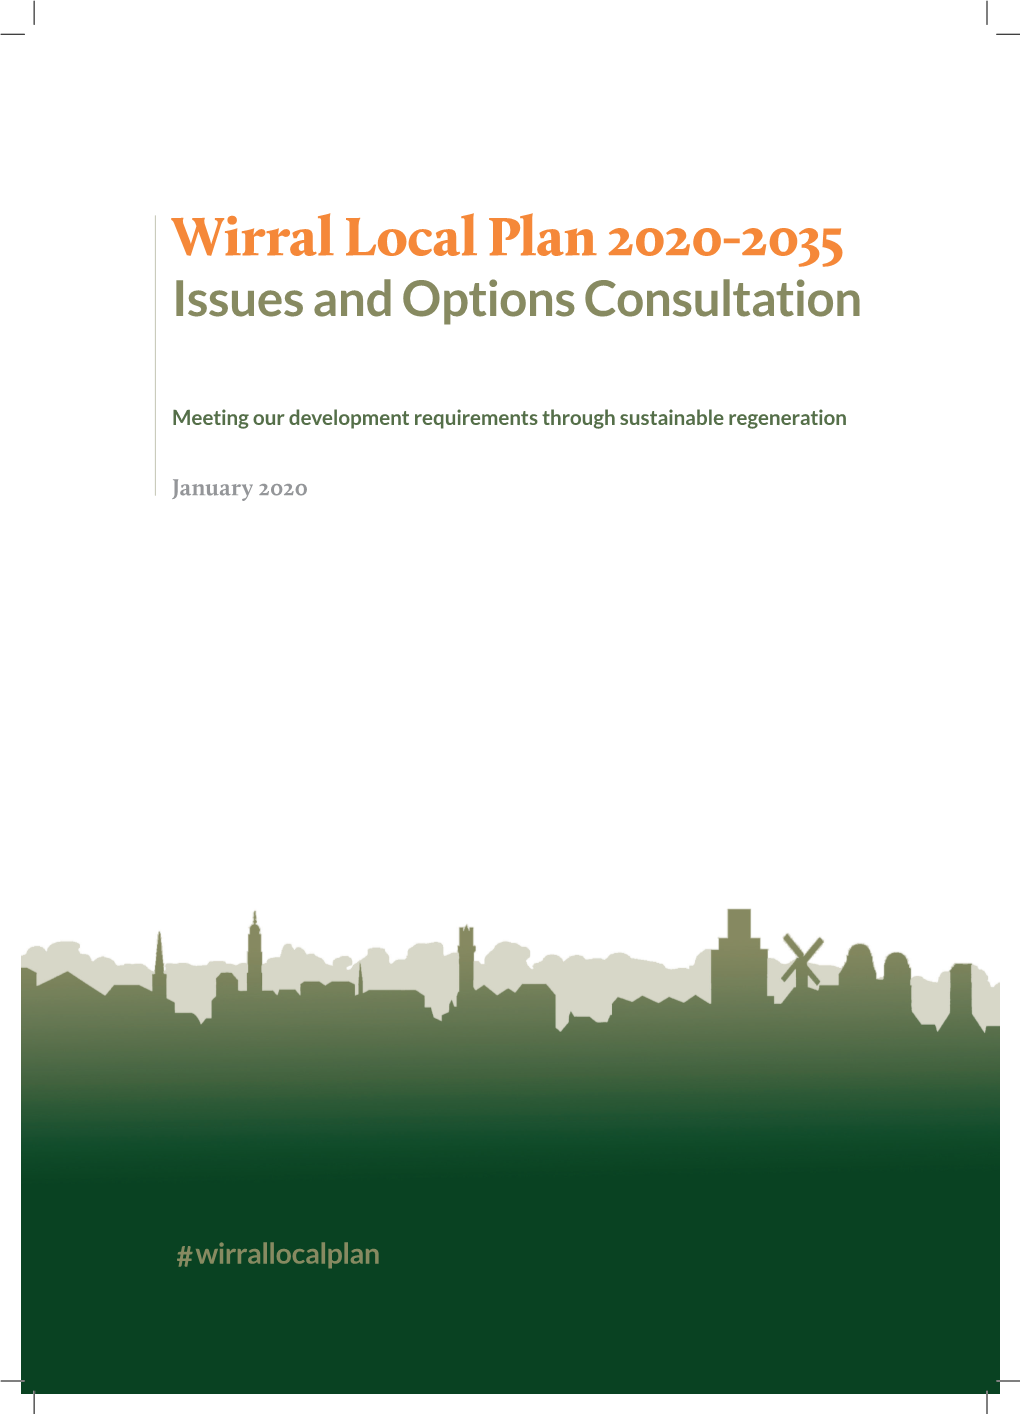 Wirral Local Plan 2020- 2035 Issues and Options Consultation